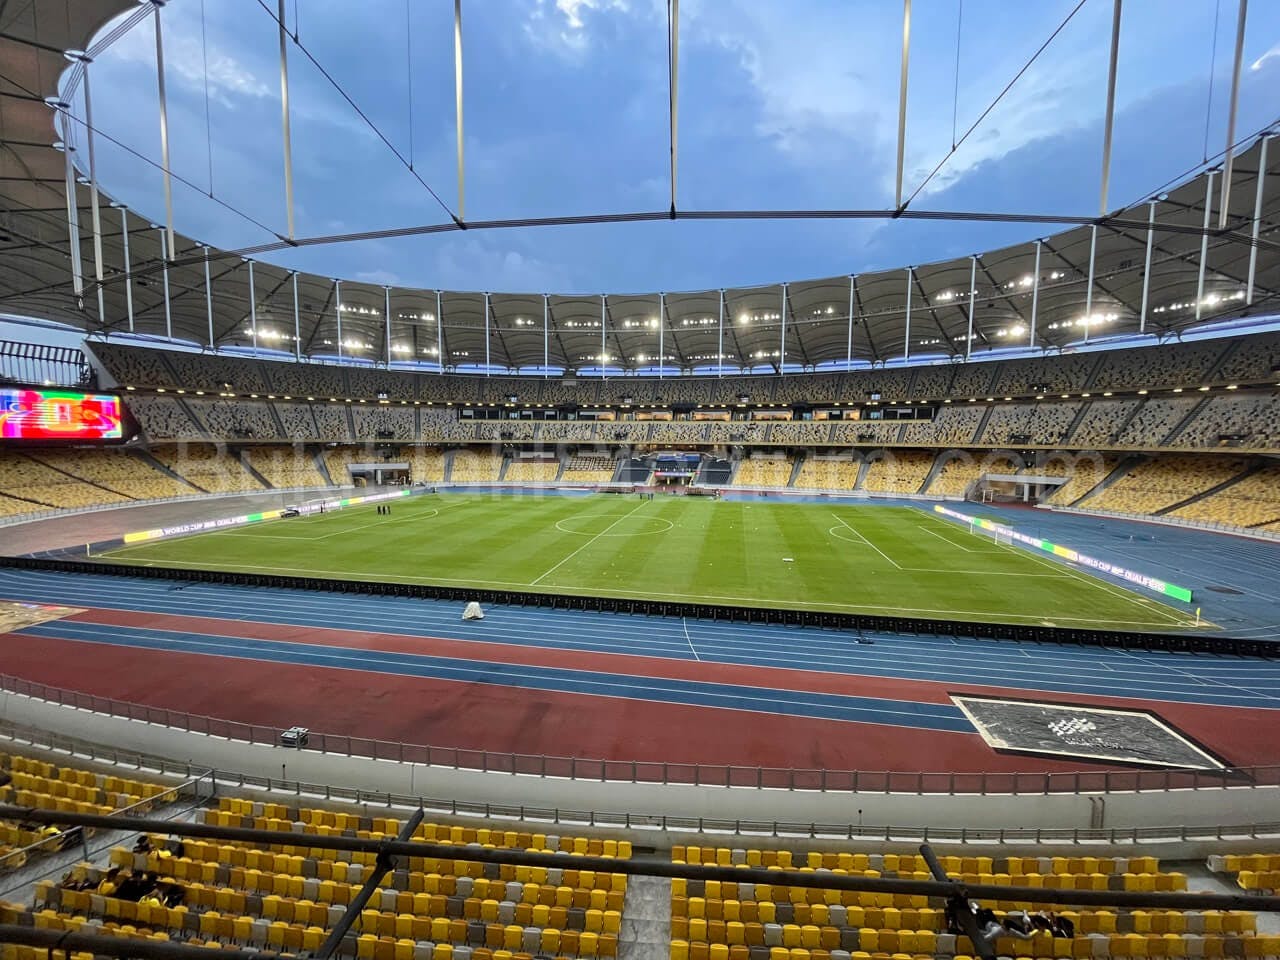 0.5x View of Bukit Jalil field from section 211 of Stadium Bukit Jalil.